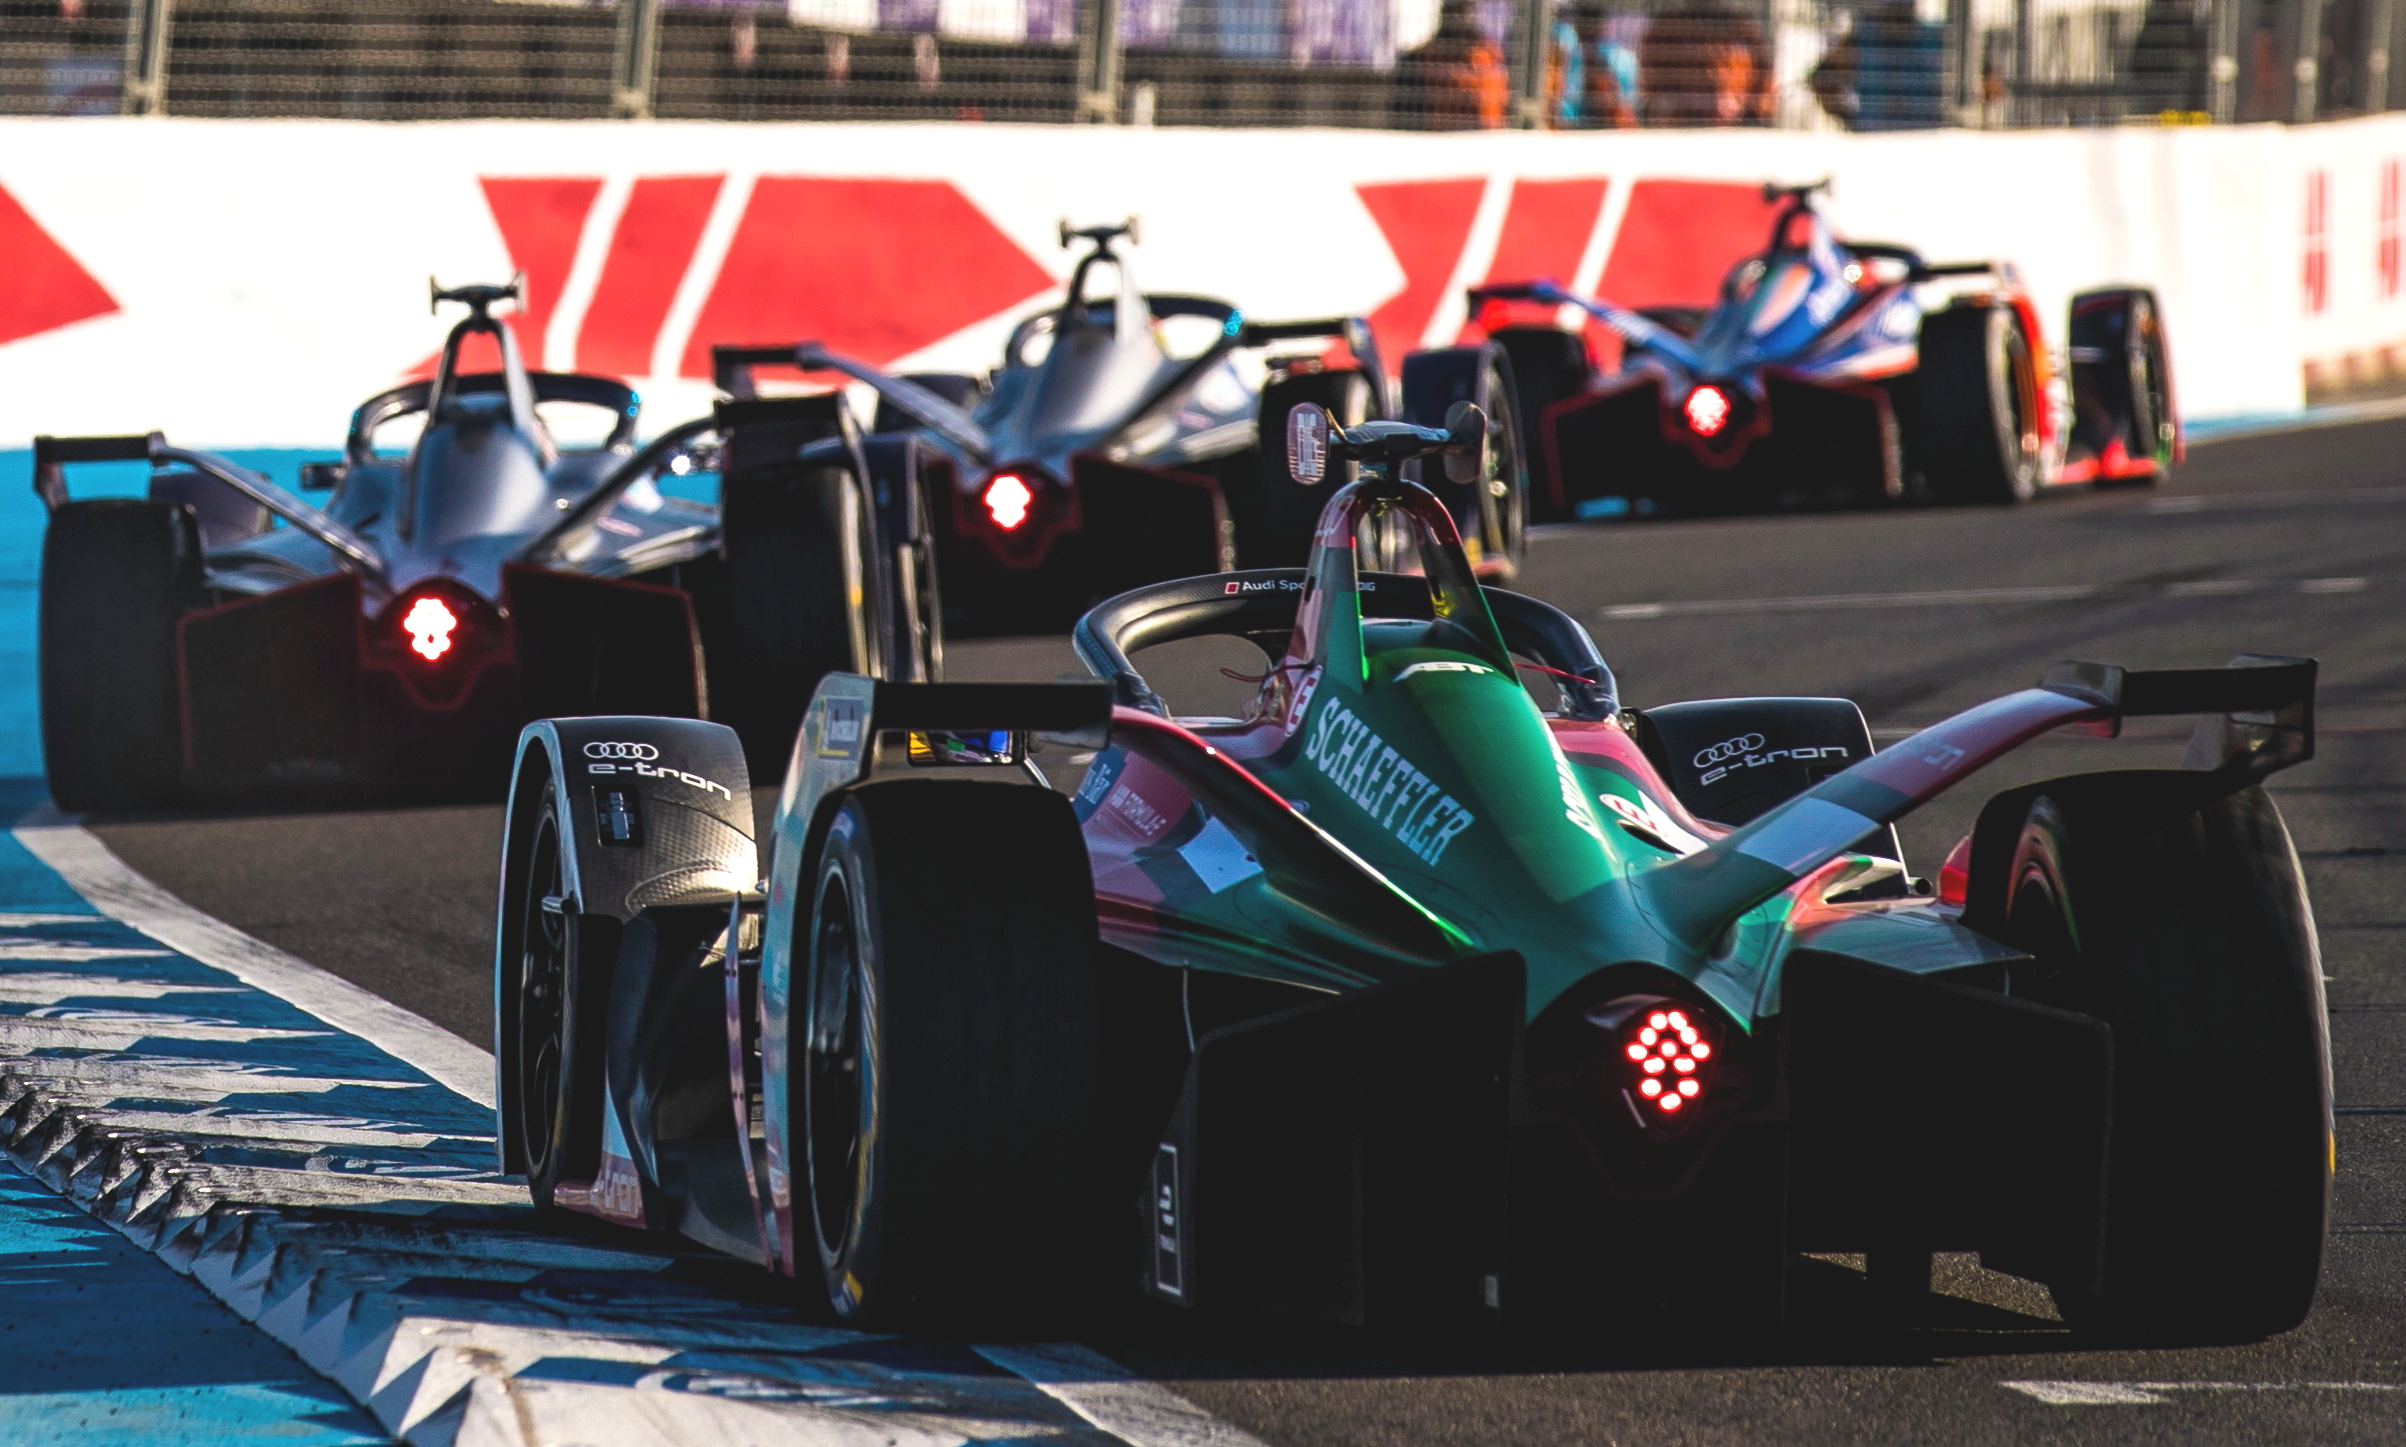 The 2019/20 ABB FIA Formula E Championship will race in 12 of the world’s leading cities, including three new locations - Seoul, Jakarta and London. Hong Kong - where increasingly violent protests continue to damage the SAR's image, economy and reputation - will not host the event in the 2019/2020 season.  Click to enlarge.